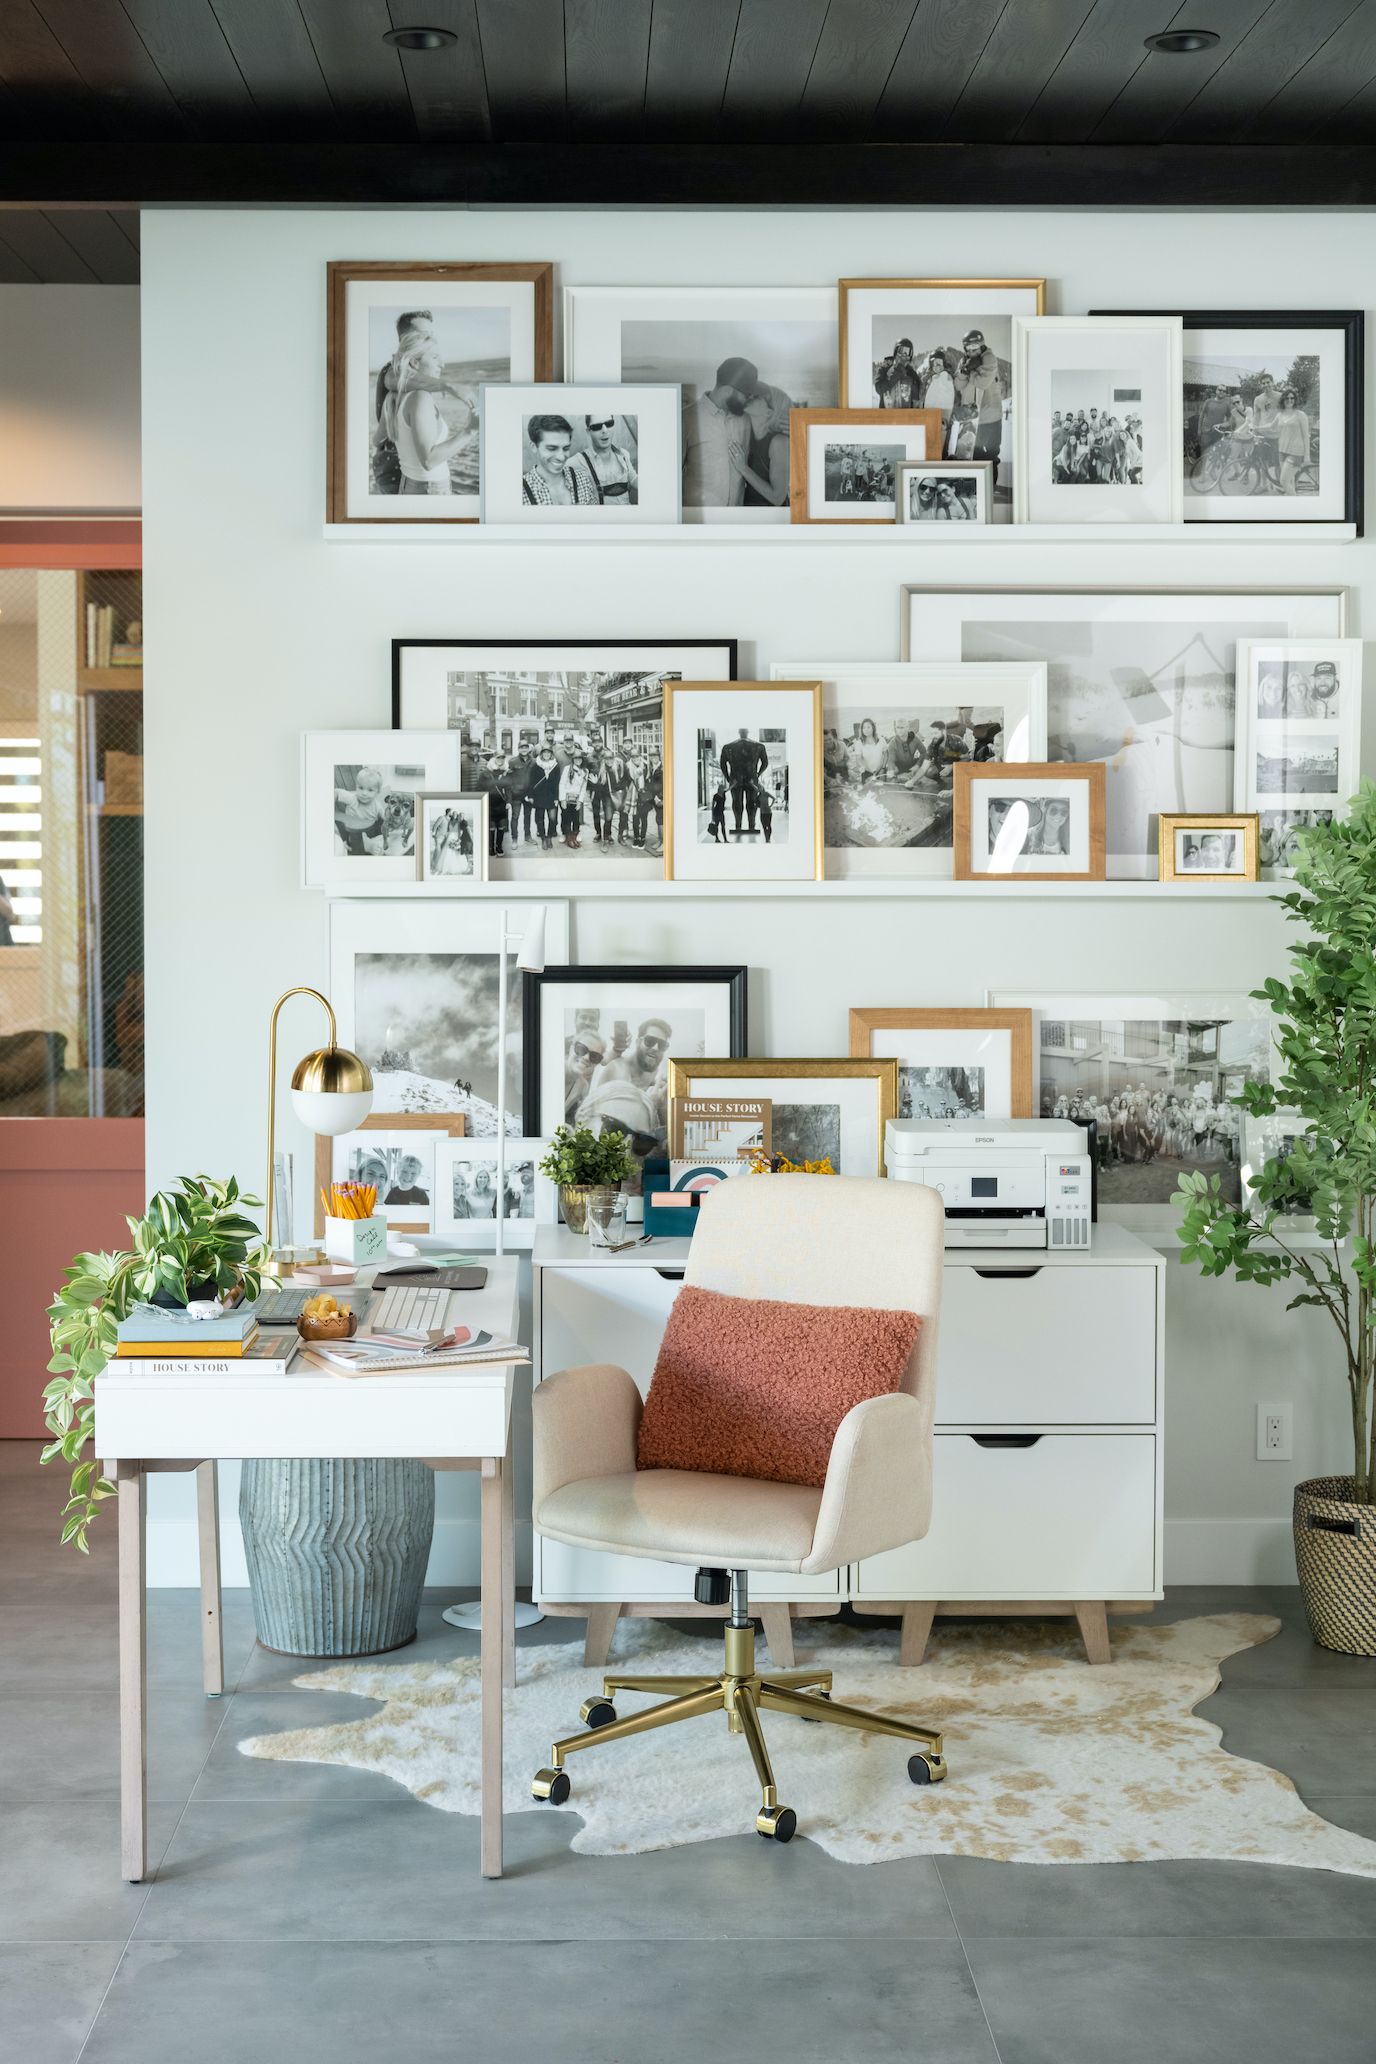 Staples Wants to Refresh Your Home Office With These Designer-Approved Looks